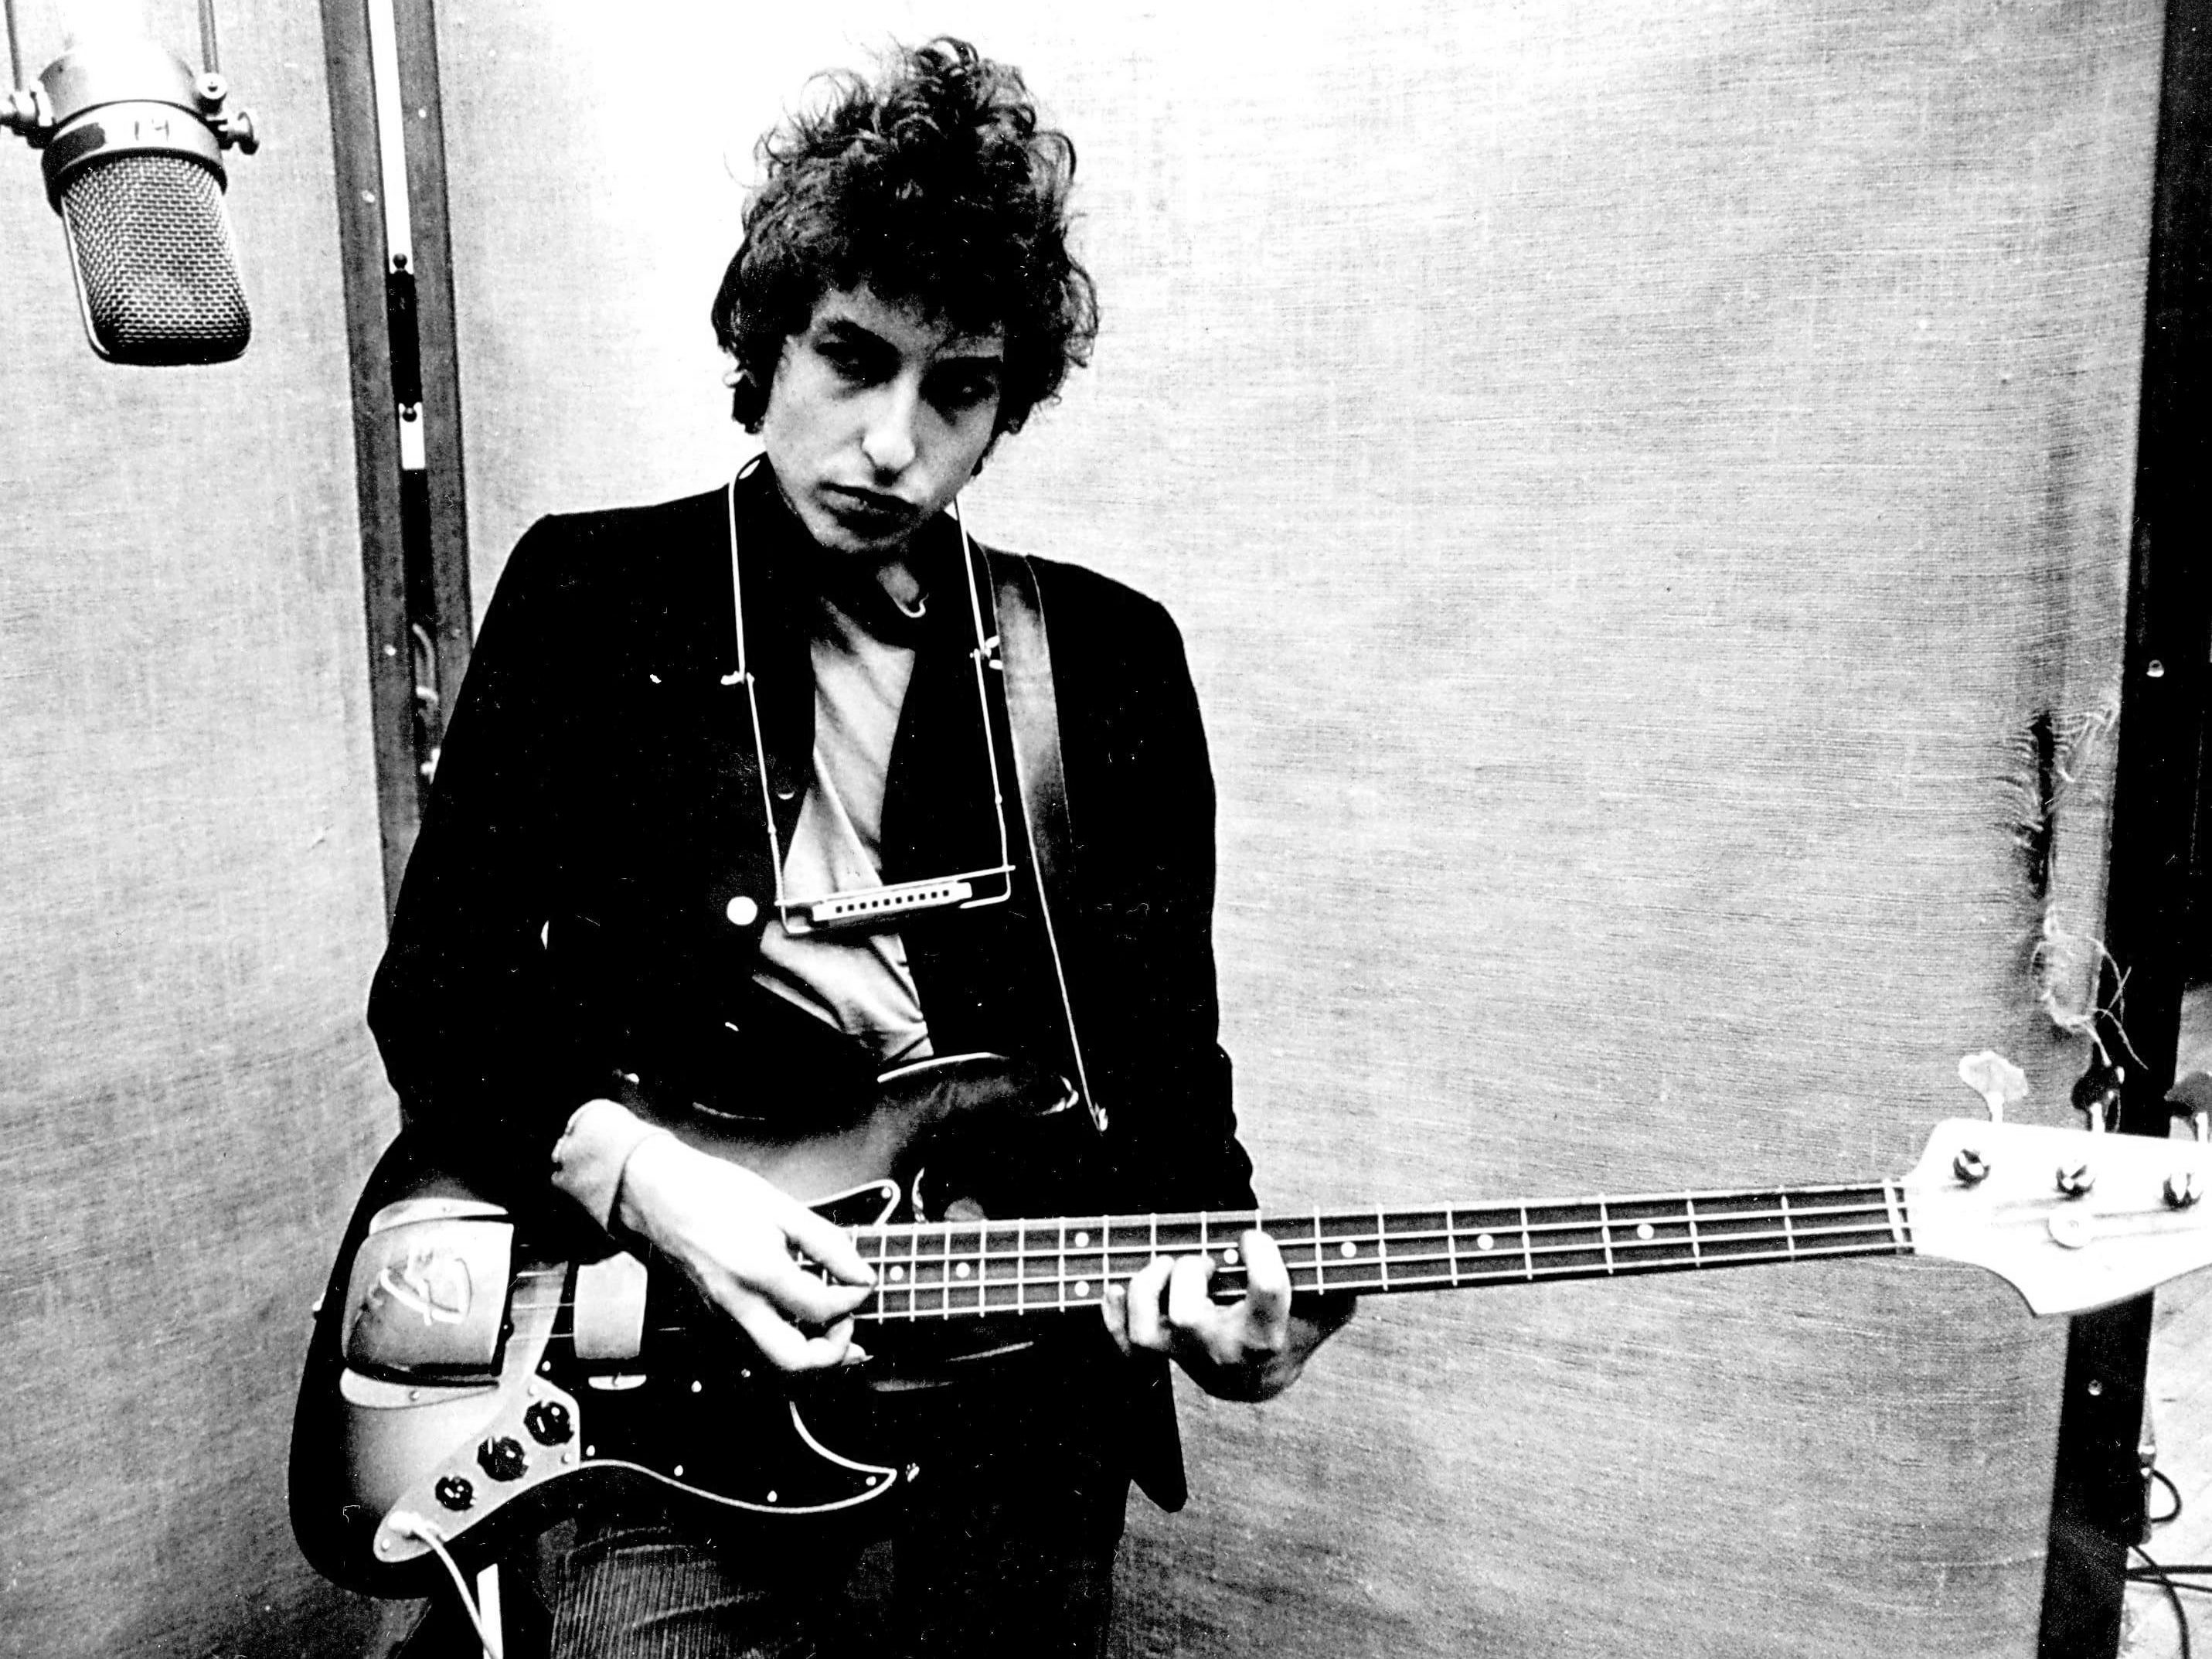 Bob Dylan pictured in 1965 – four years after he released his debut album